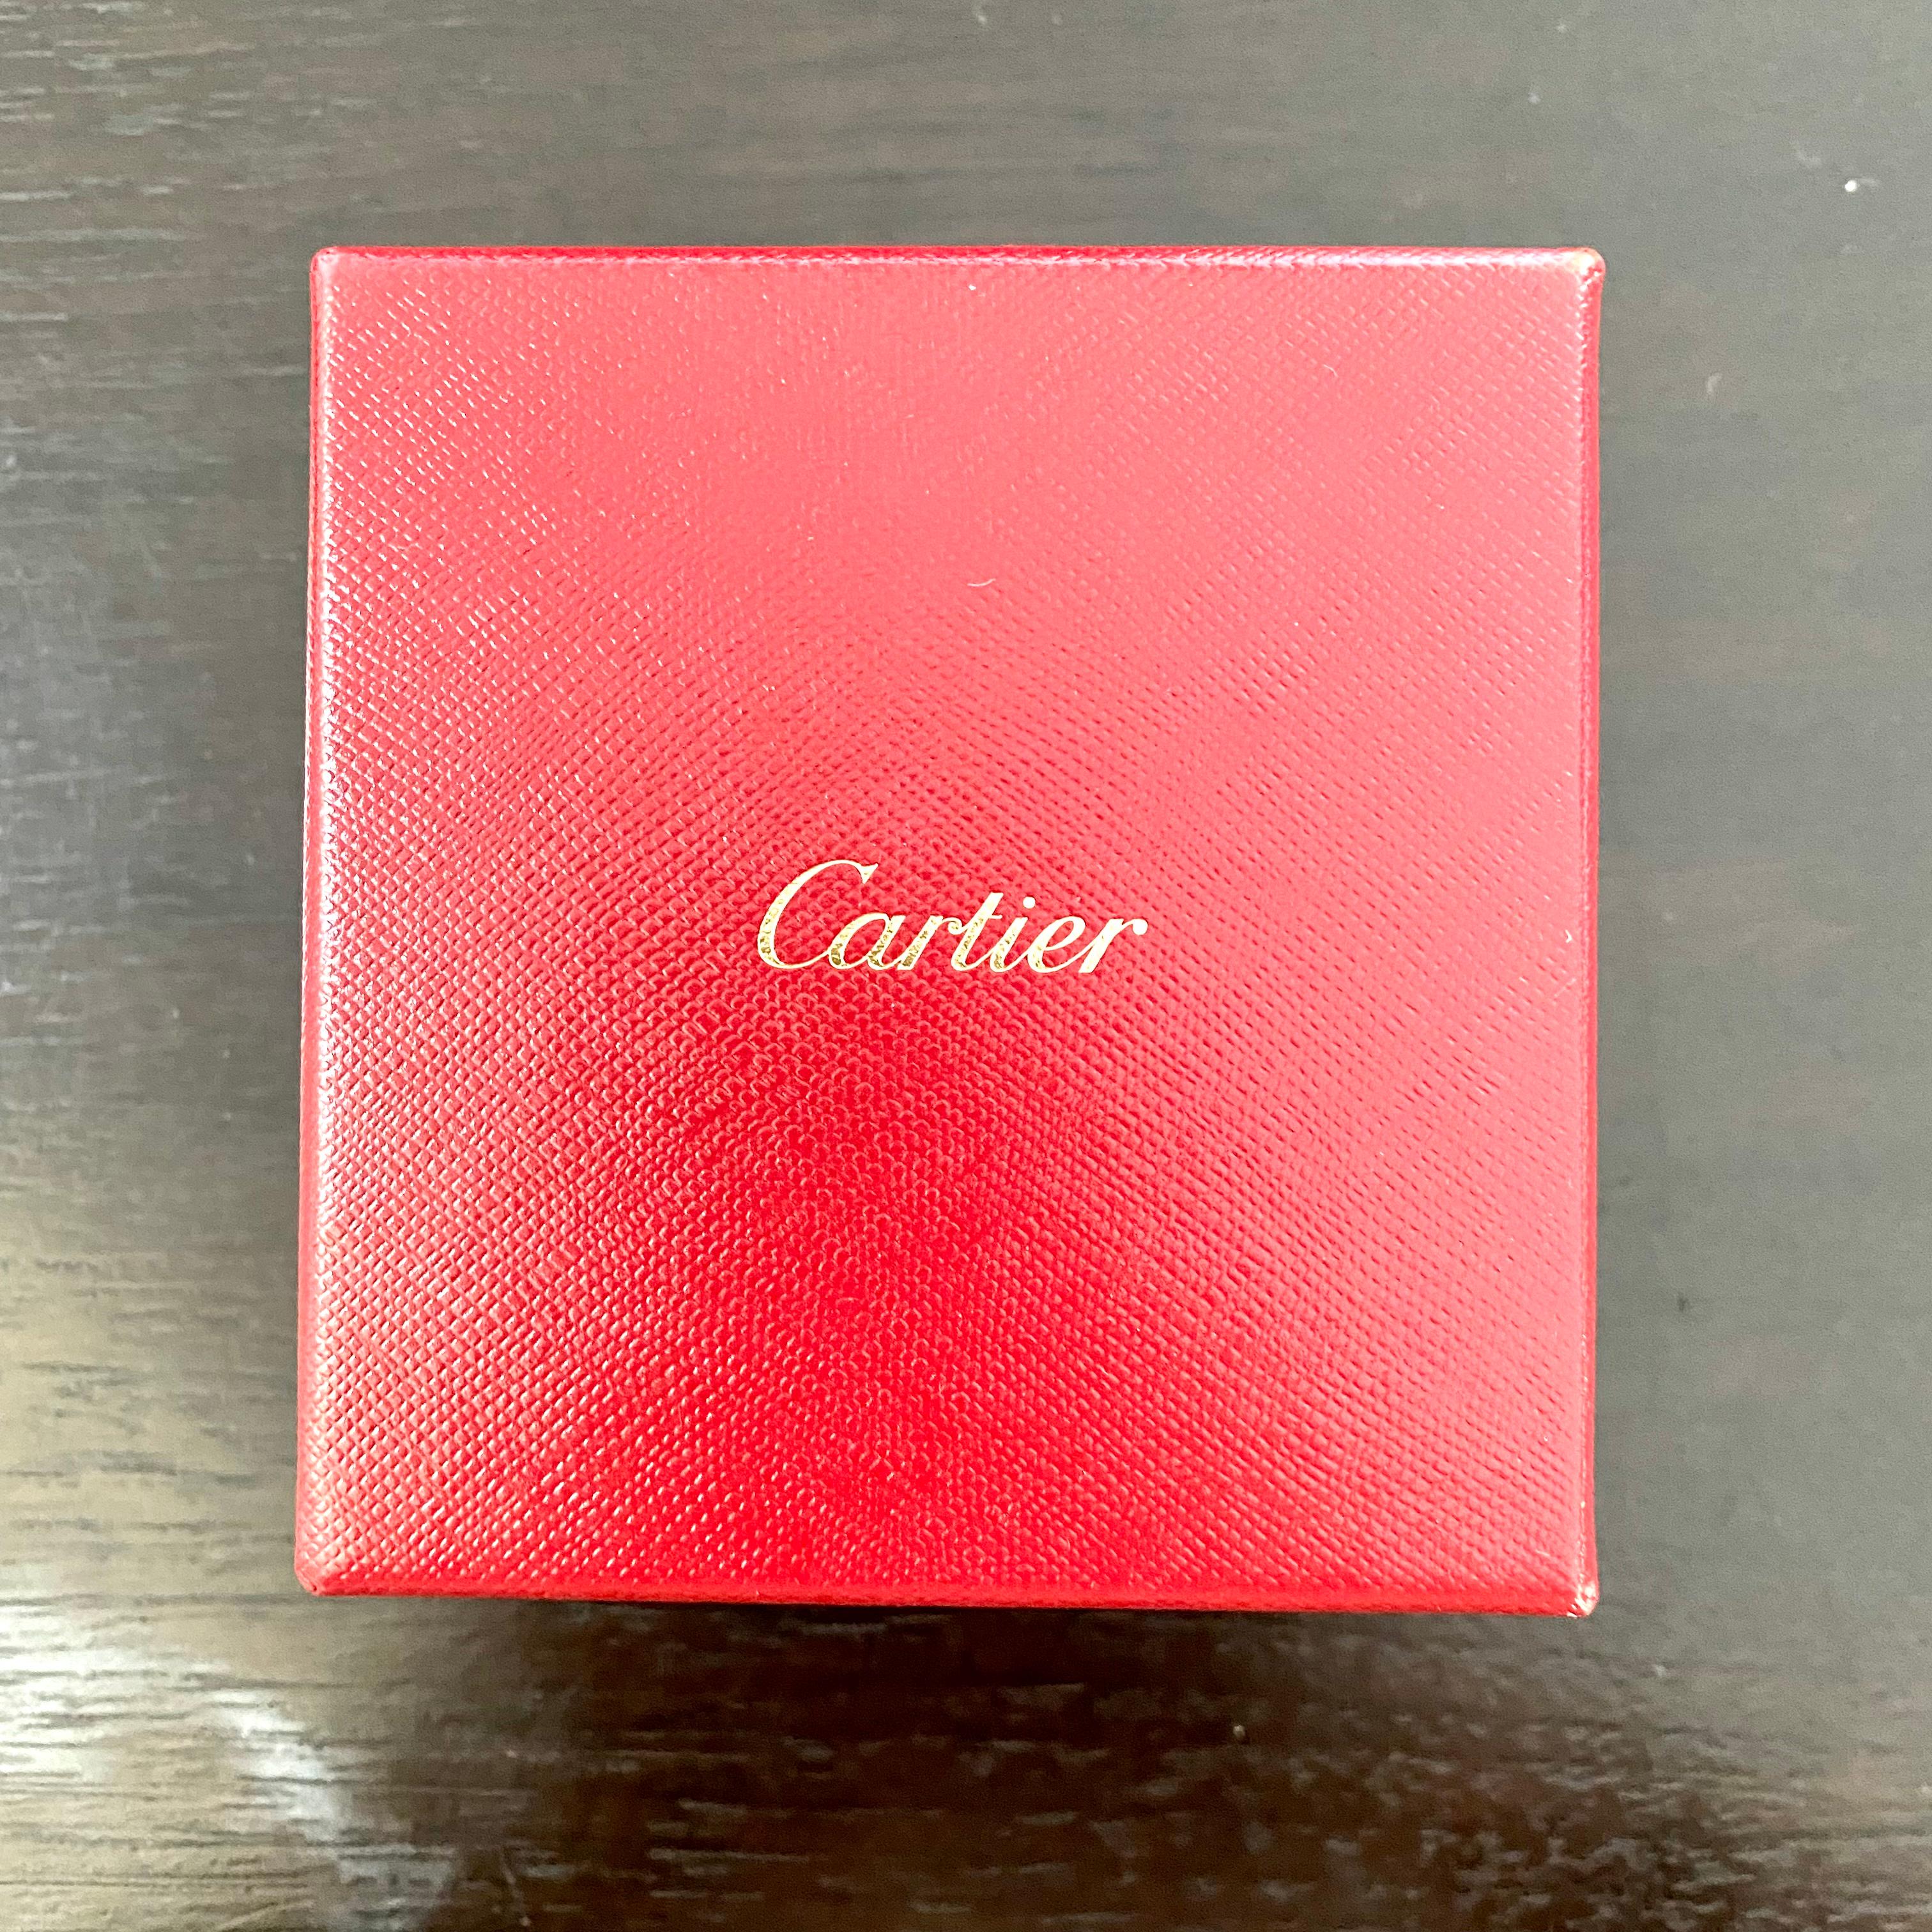 Cartier Vintage 3.25 MM Maillon Panthere Ring 18 Karat White Gold Size 5.75 For Sale 1